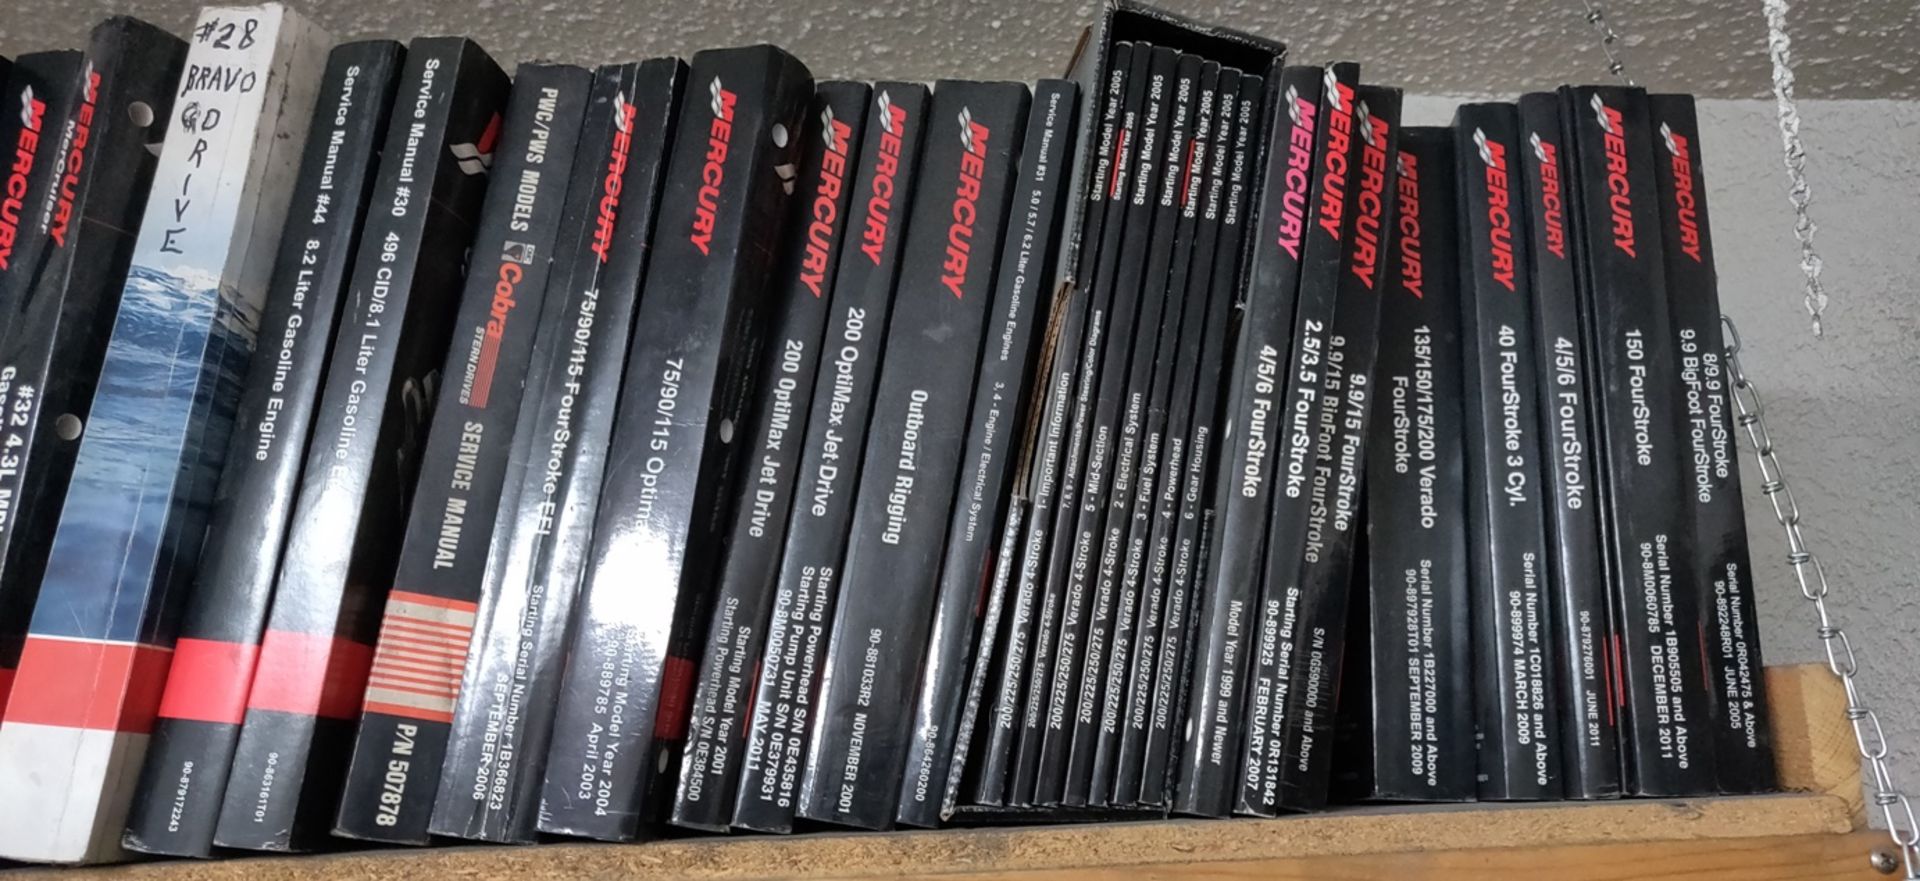 MISC OUTBOARD MOTOR MANUALS (APPROX OVER 100)